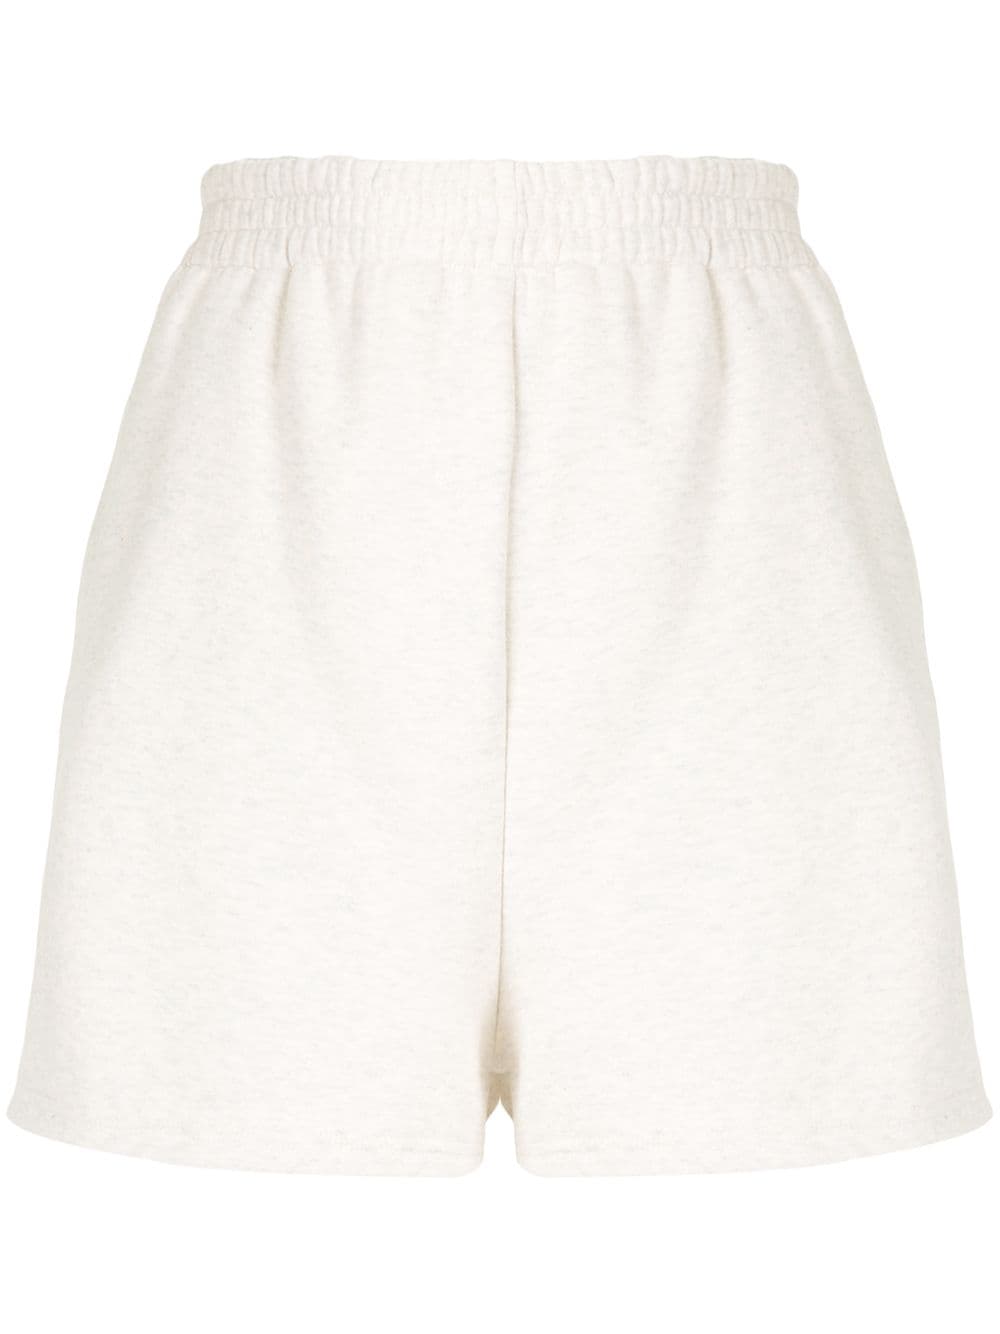 Shop SIR. high-waisted track shorts with Express Delivery - FARFETCH